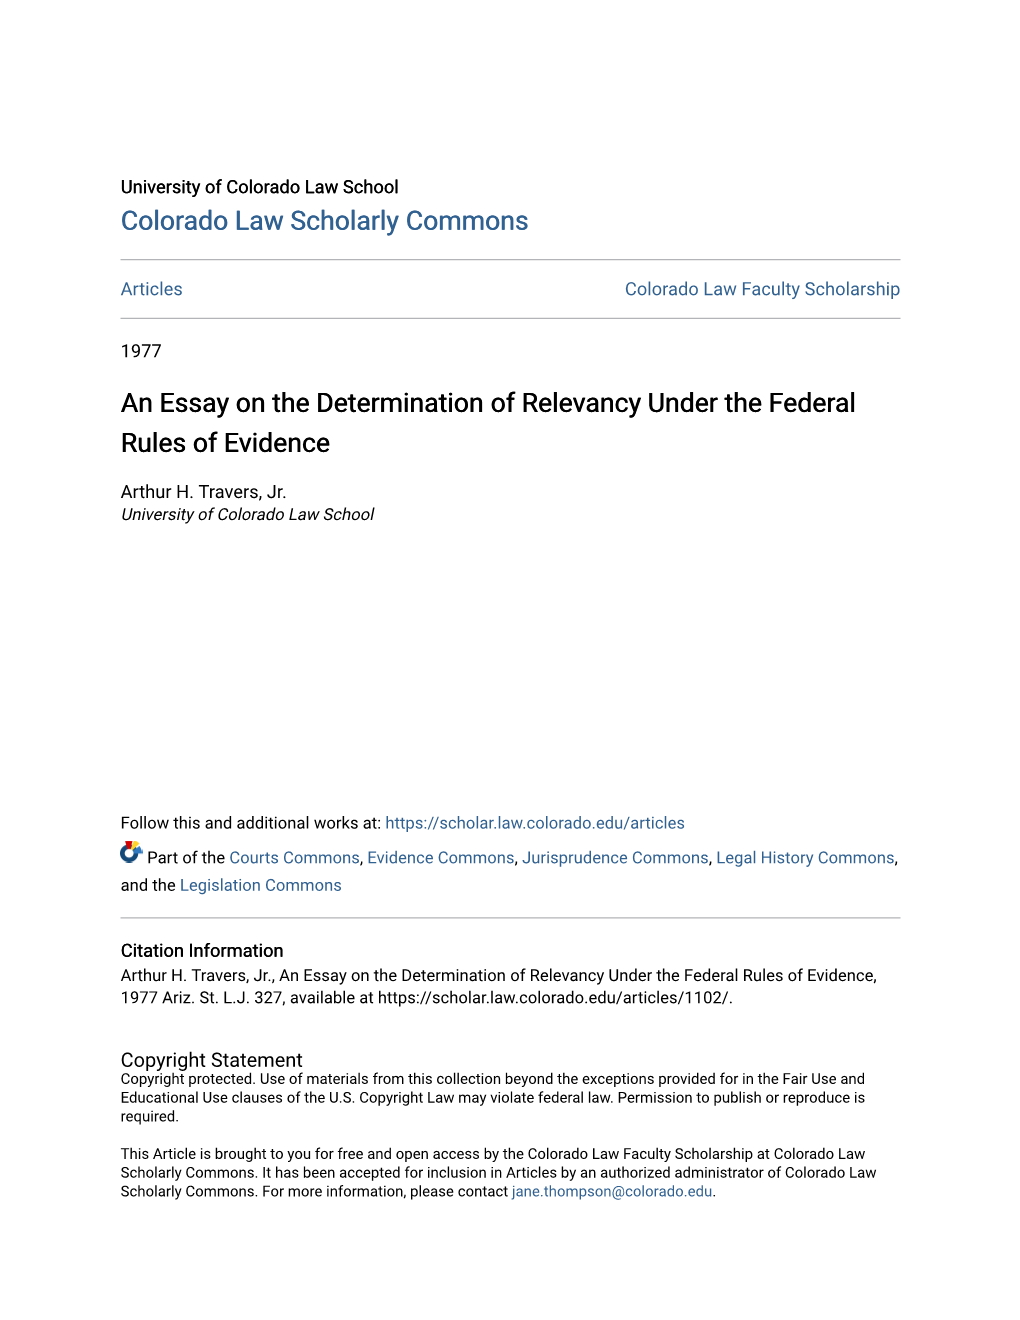 An Essay on the Determination of Relevancy Under the Federal Rules of Evidence